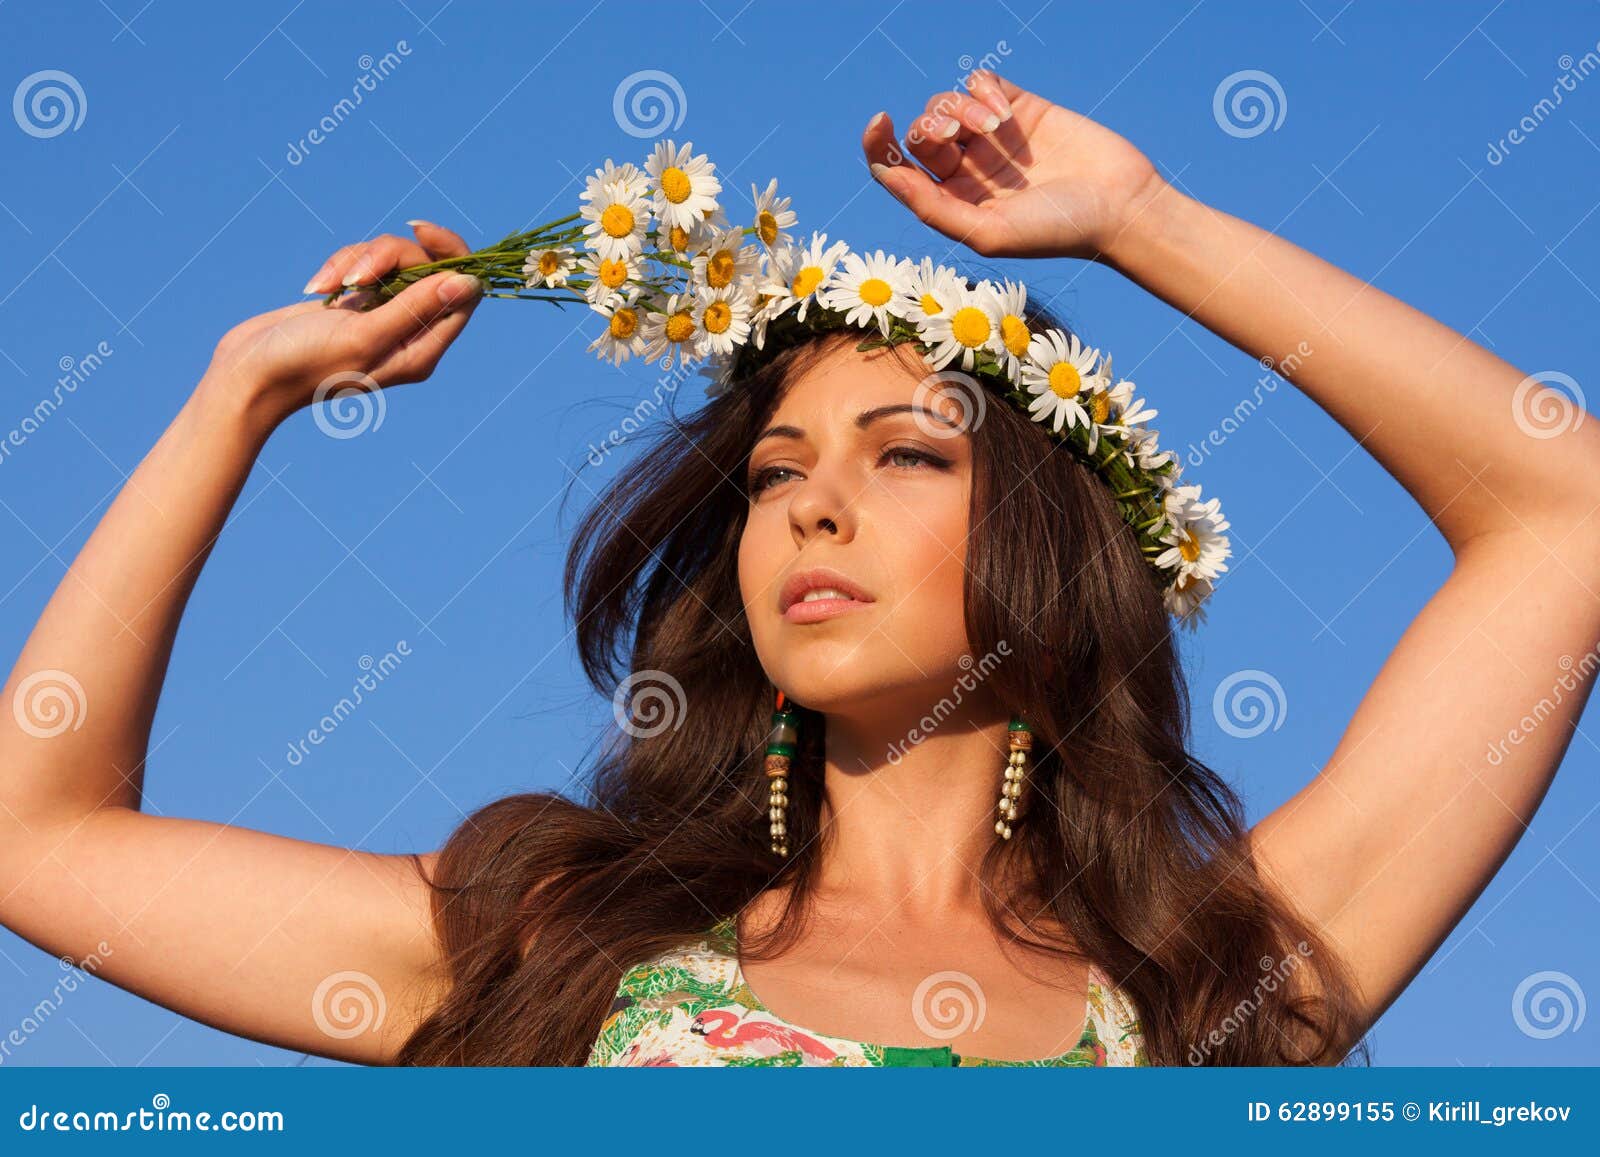 Girl on camomile field. Girl in camomile wreath with blue sky at background